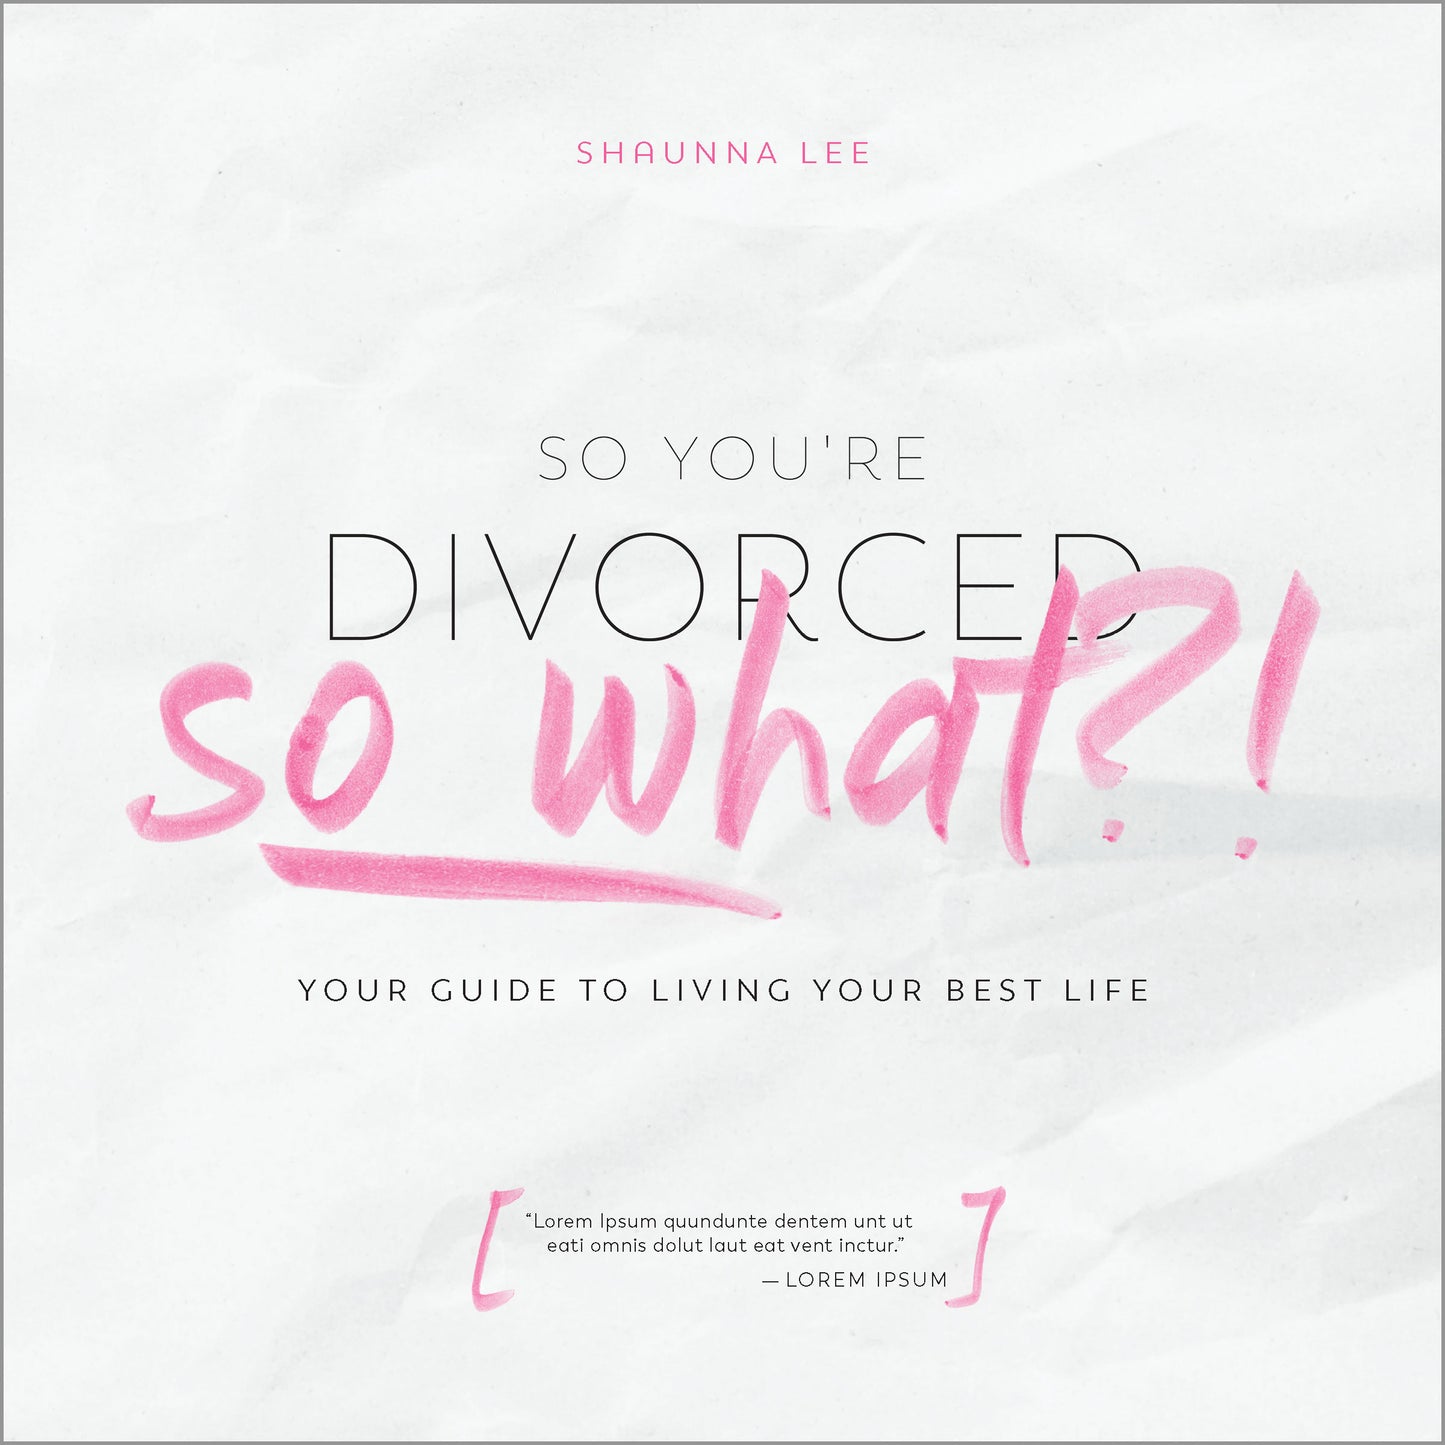 So You're Divorced, So What?